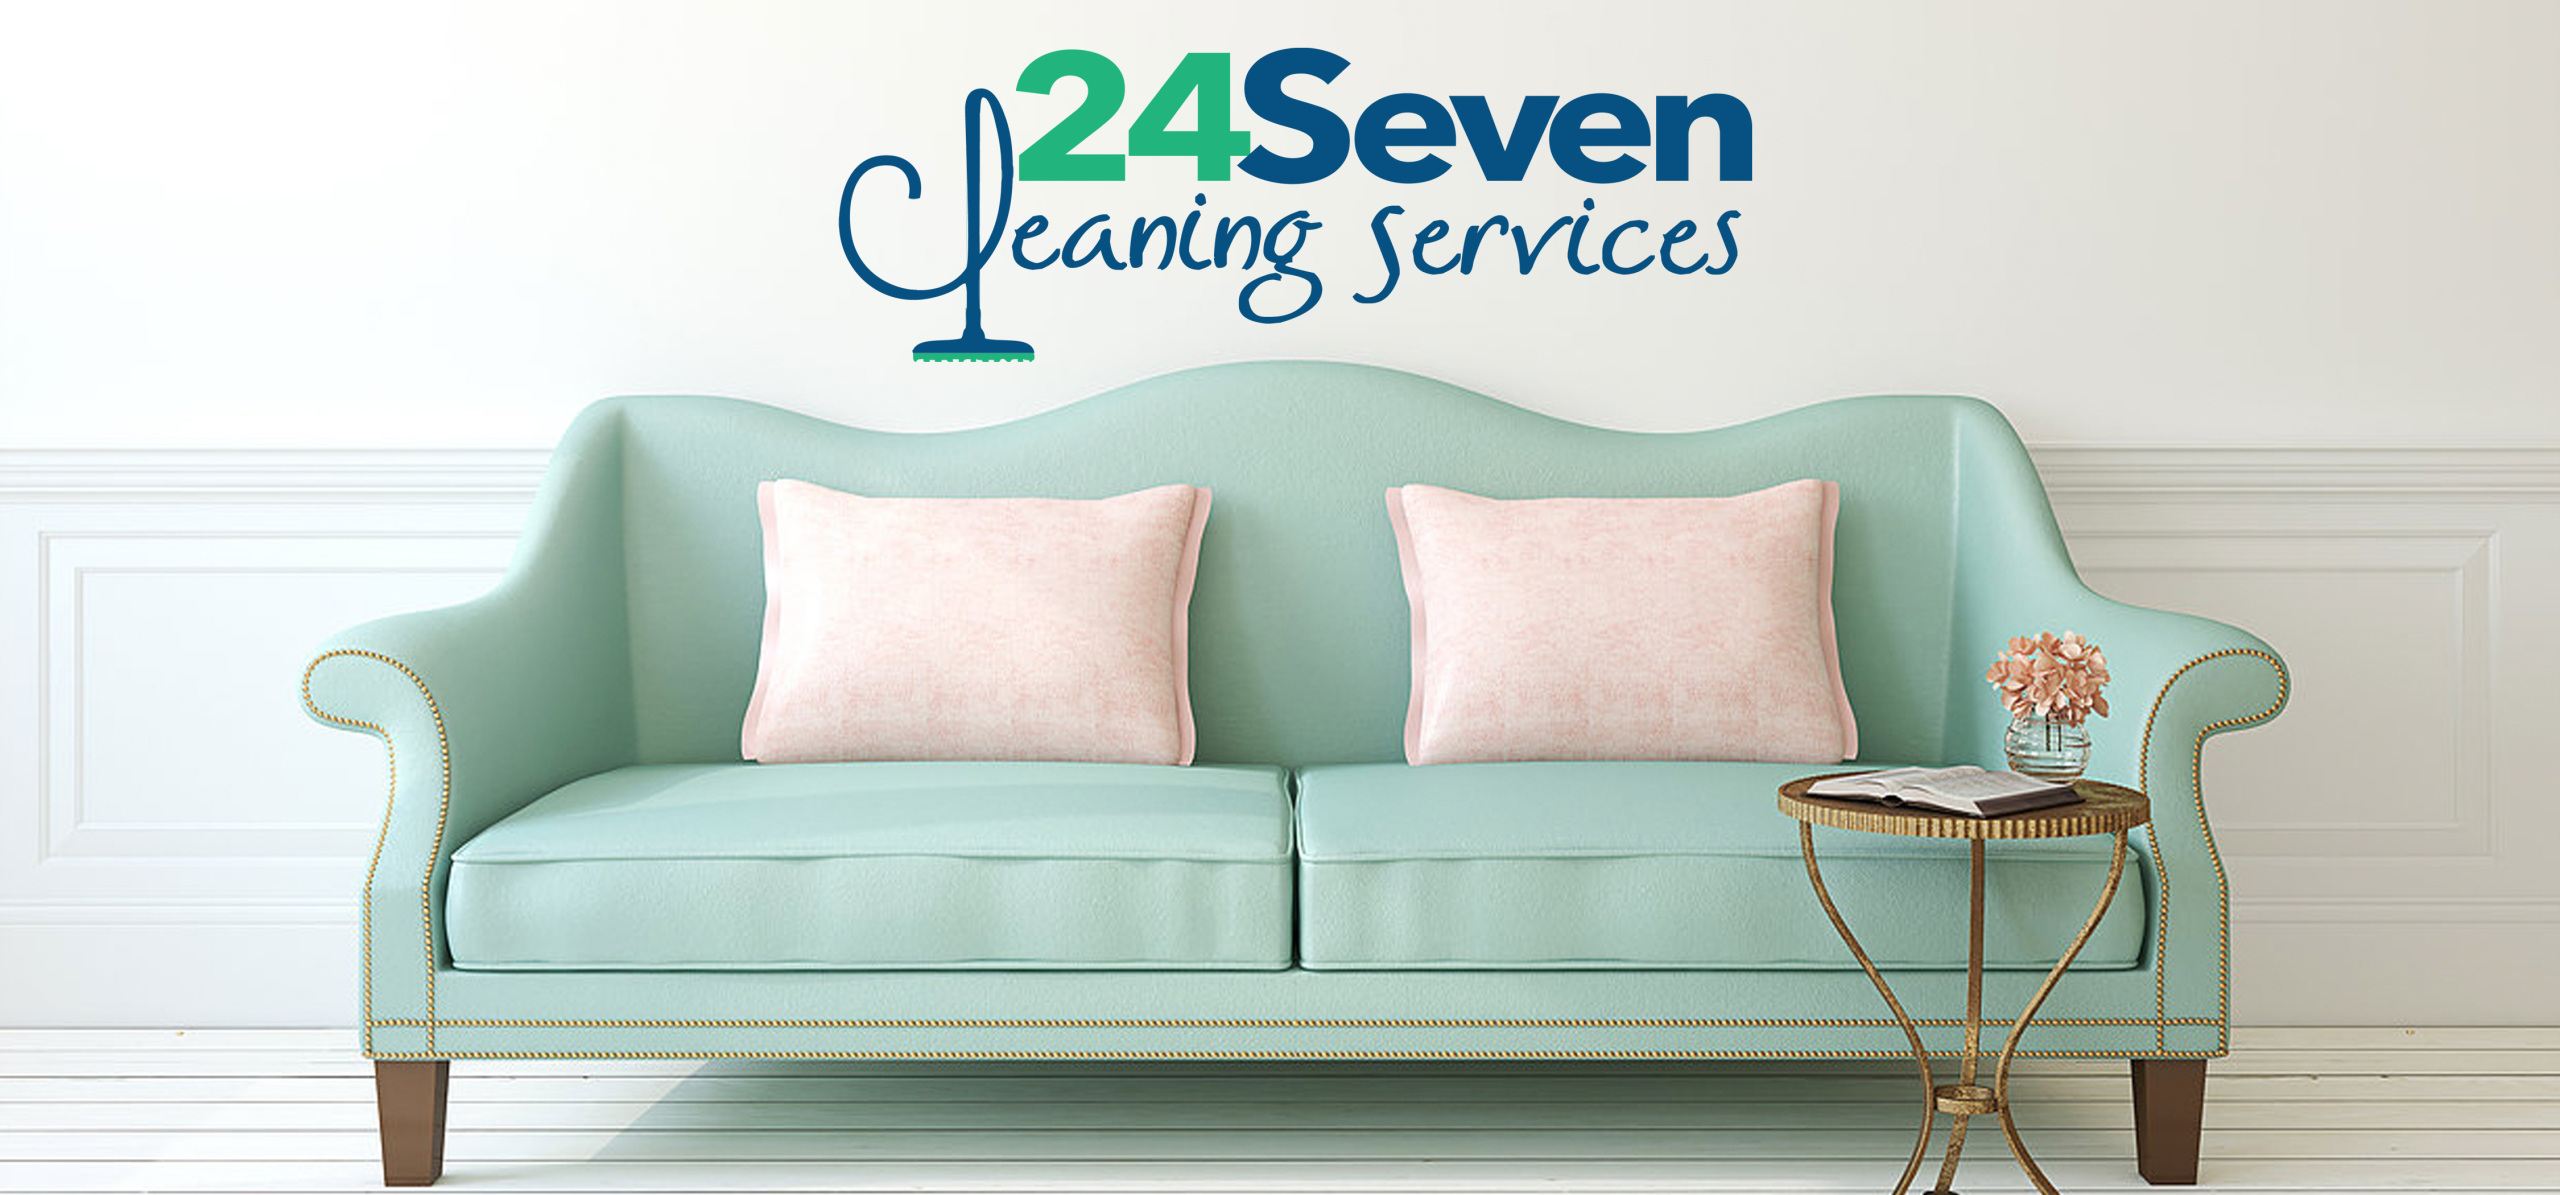 Basic Cleaning Company Ready Clean 24seven Cleaning Services